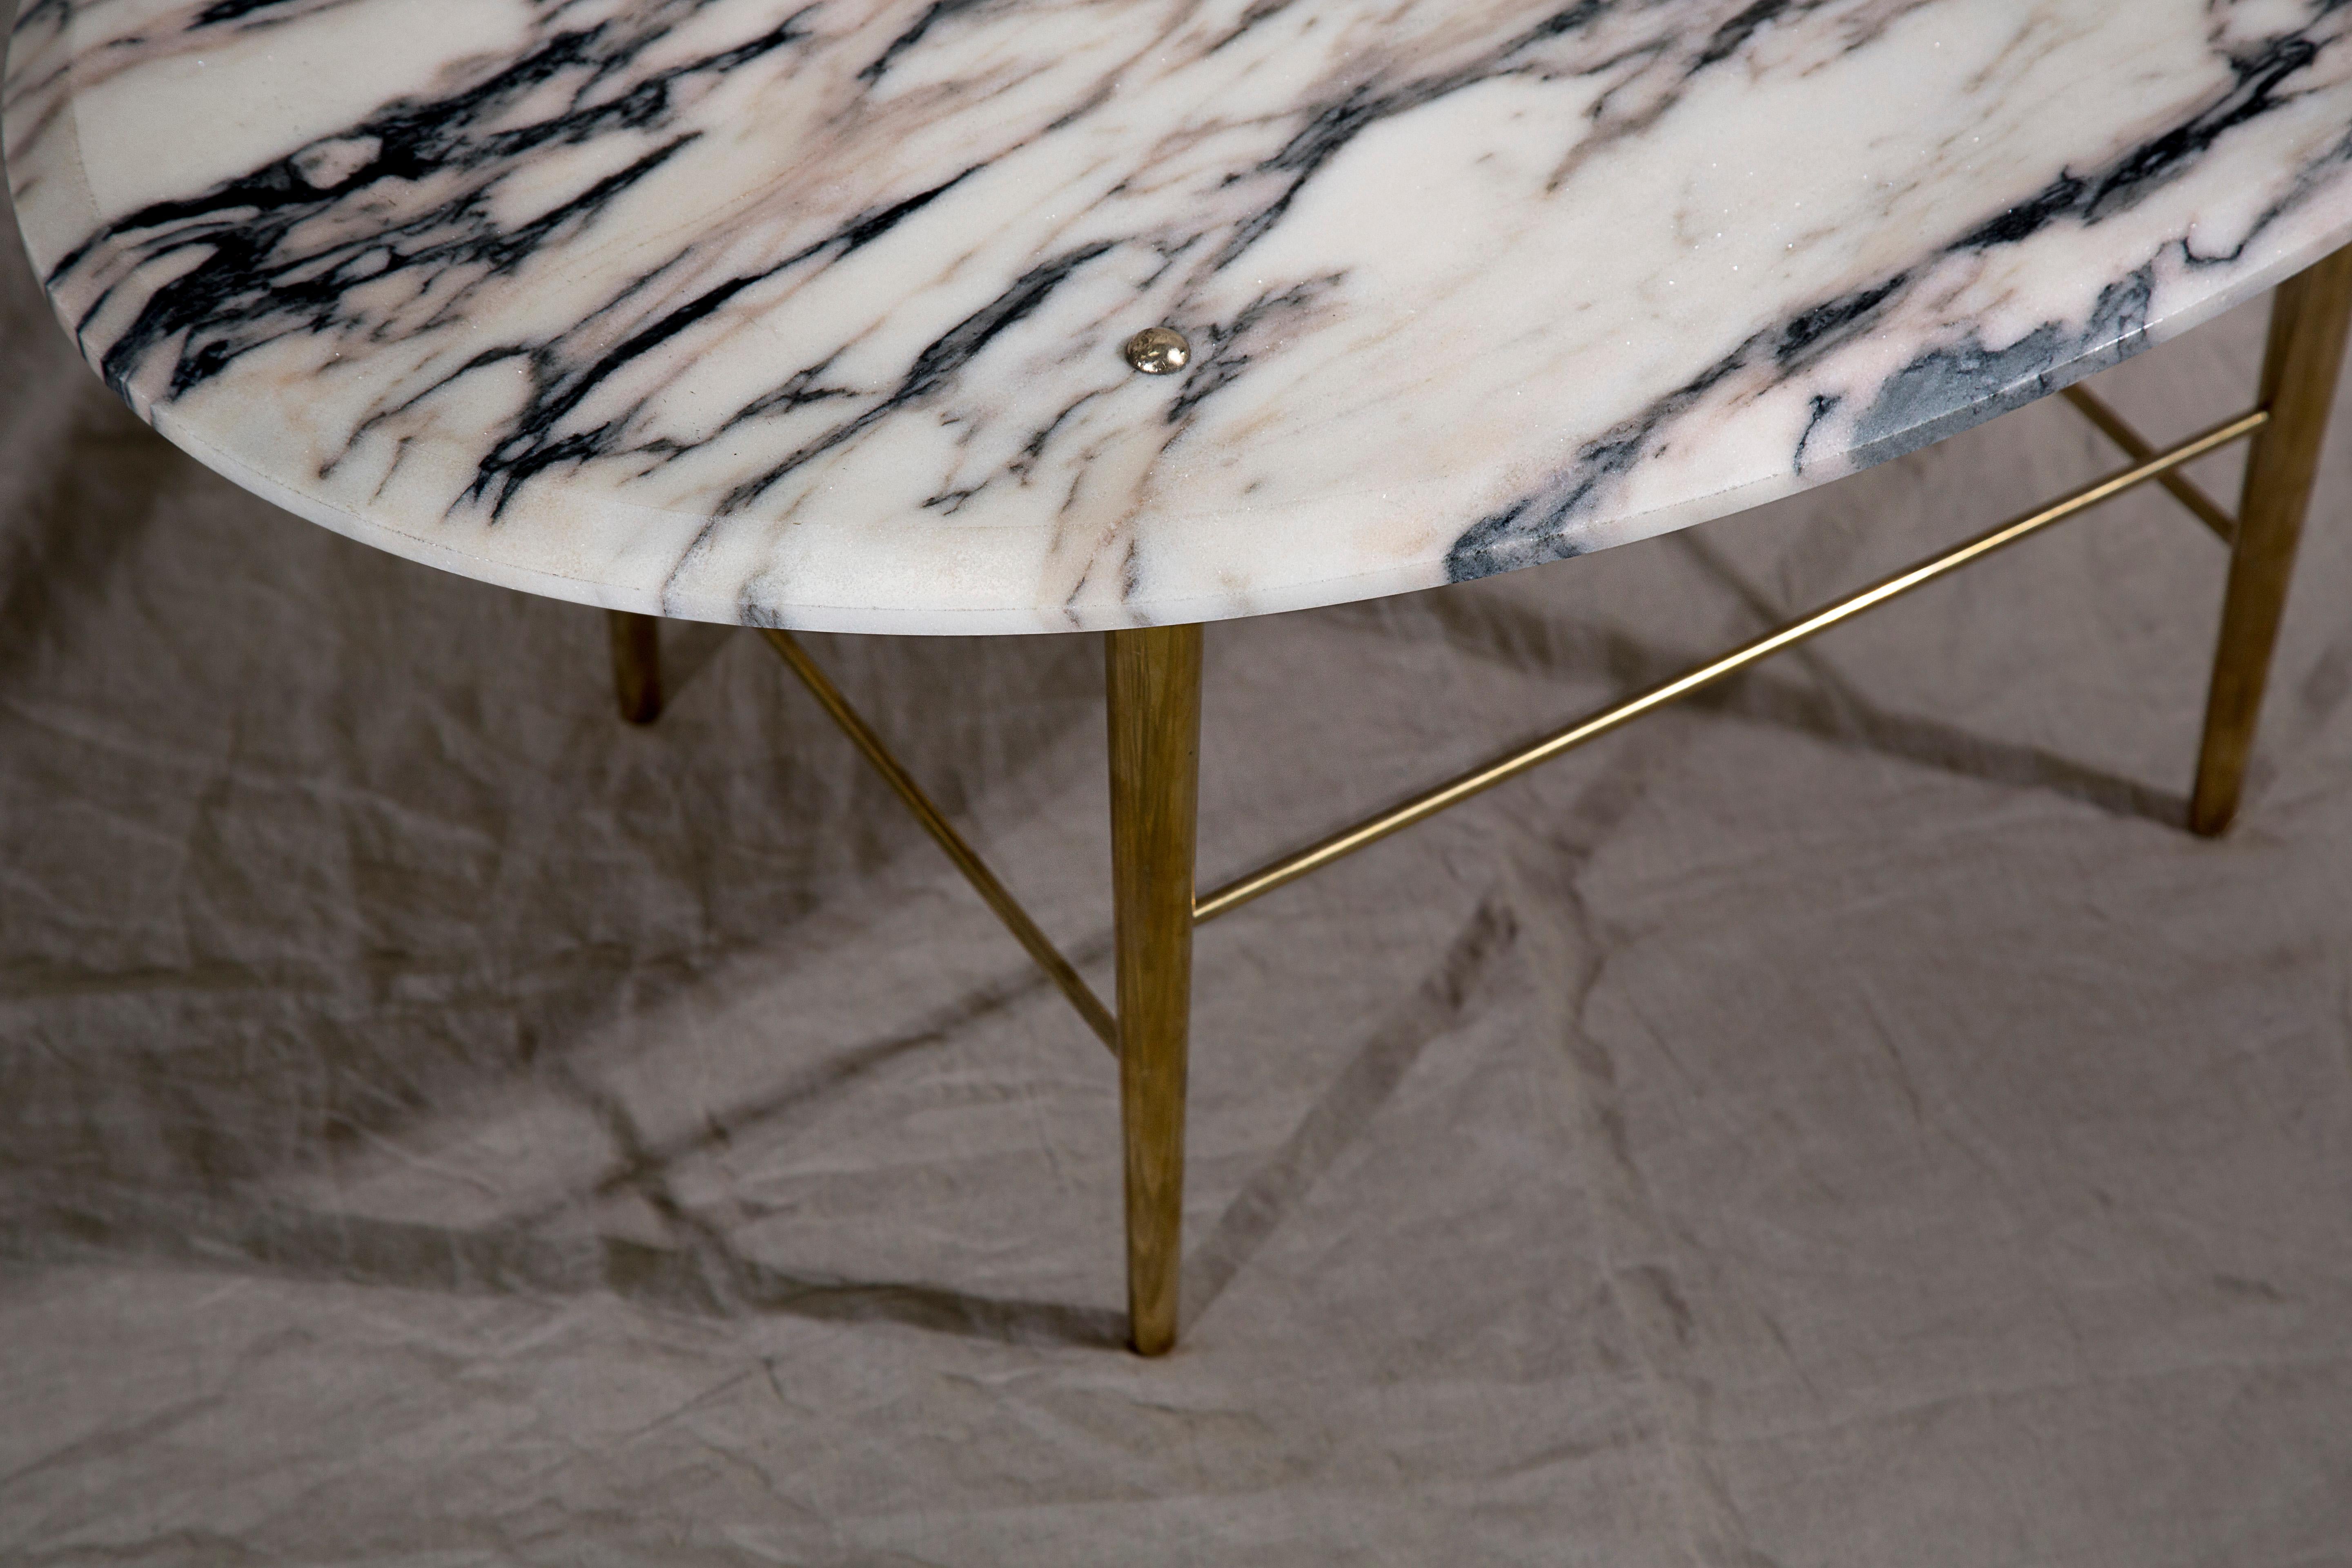 Modern Stud Coffee Table in Vulcanatta Marble and Polished Brass — Medium For Sale